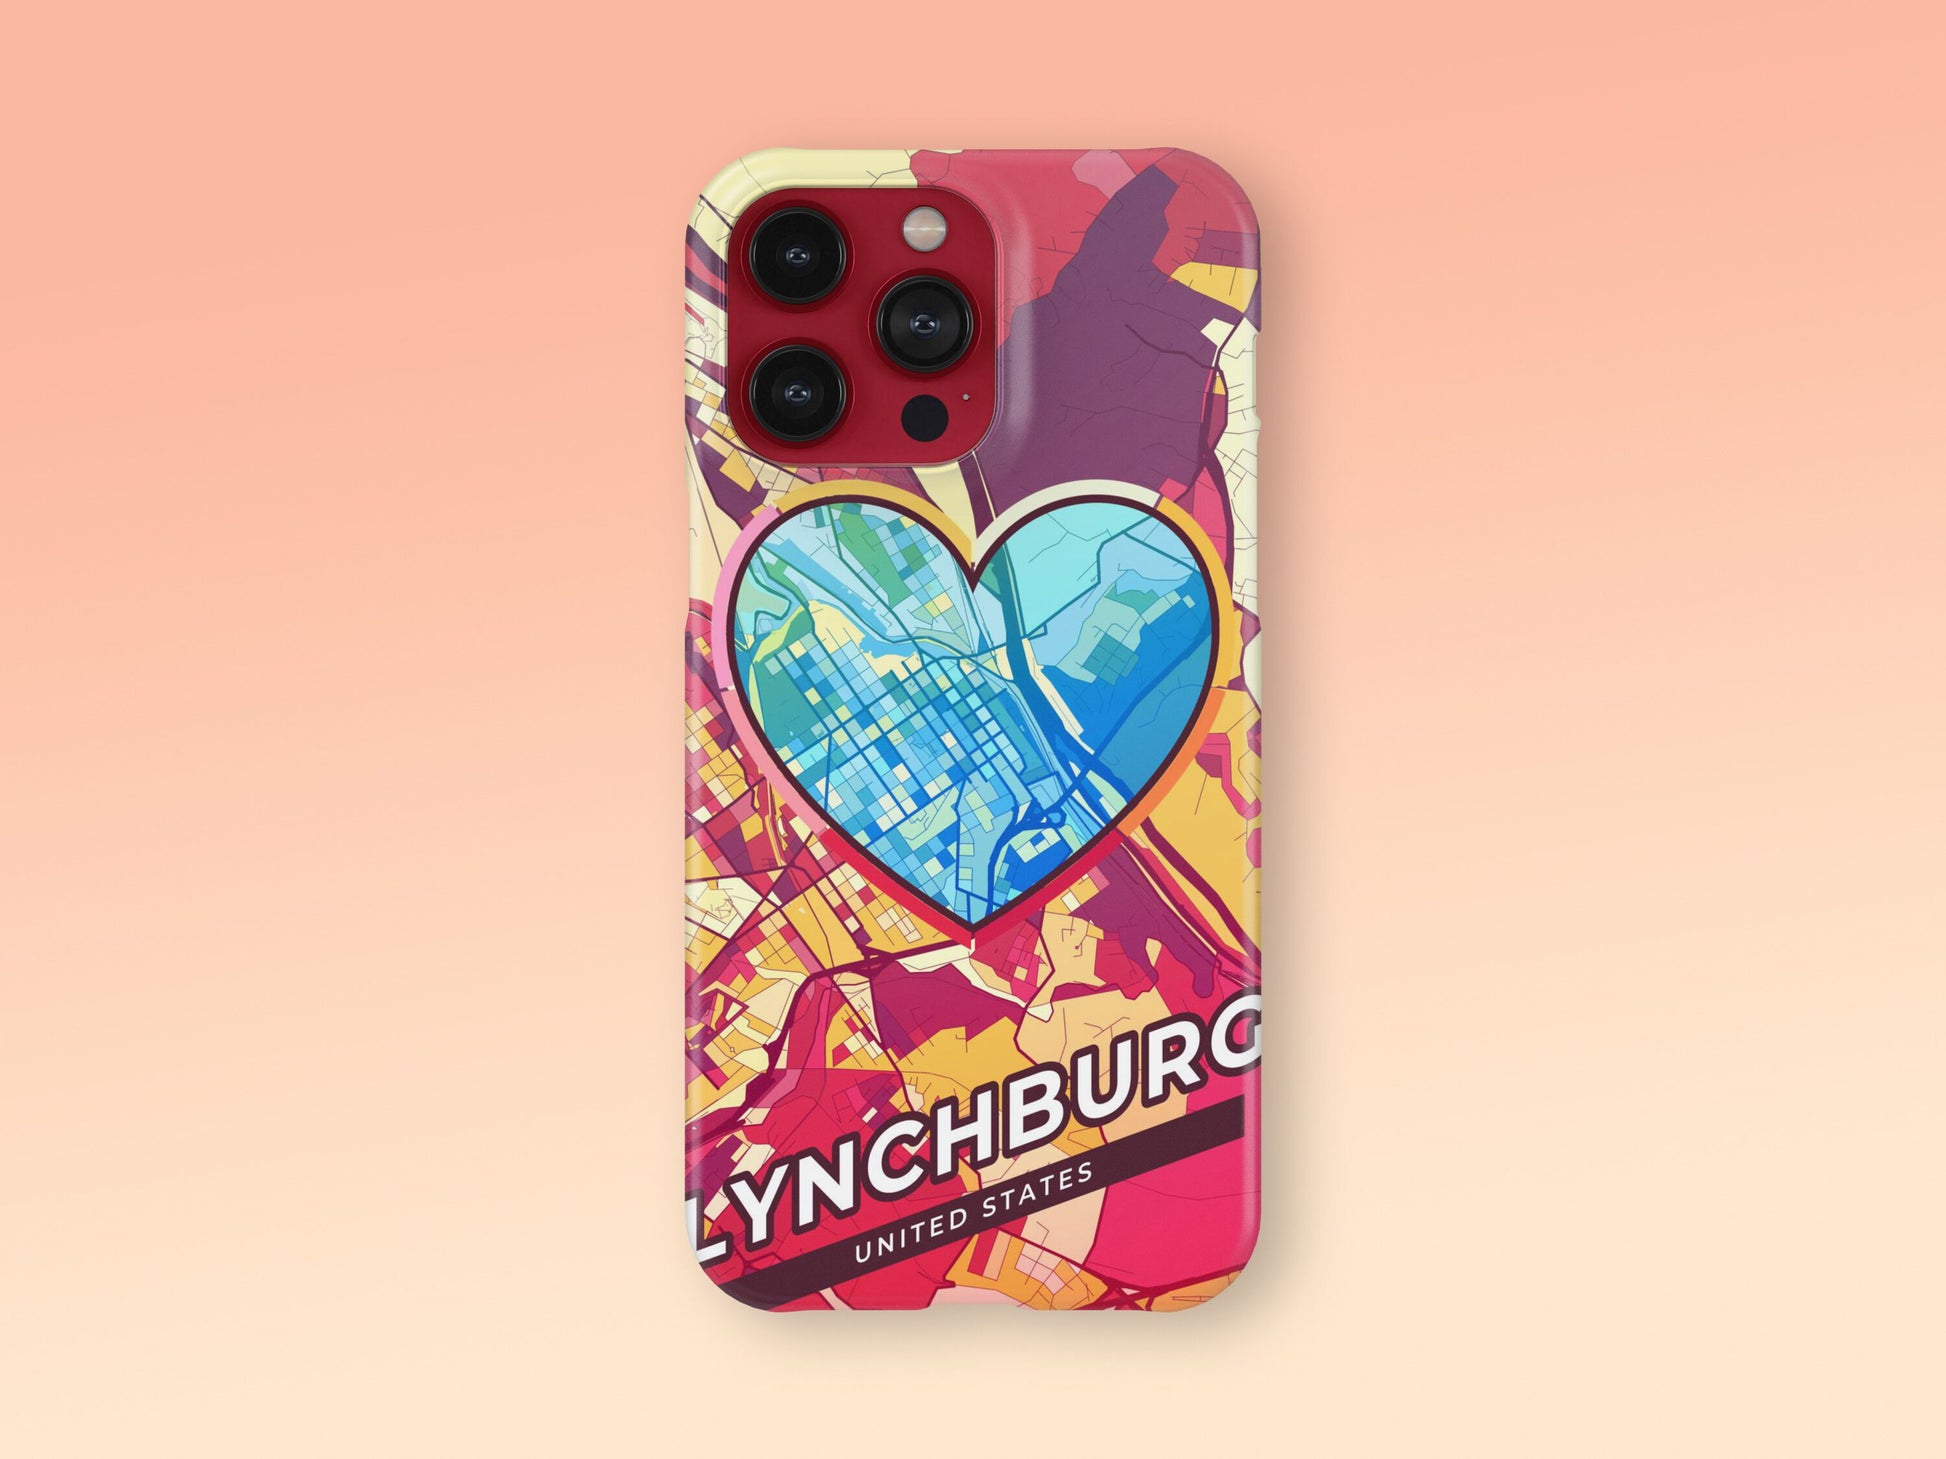 Lynchburg Virginia slim phone case with colorful icon. Birthday, wedding or housewarming gift. Couple match cases. 2